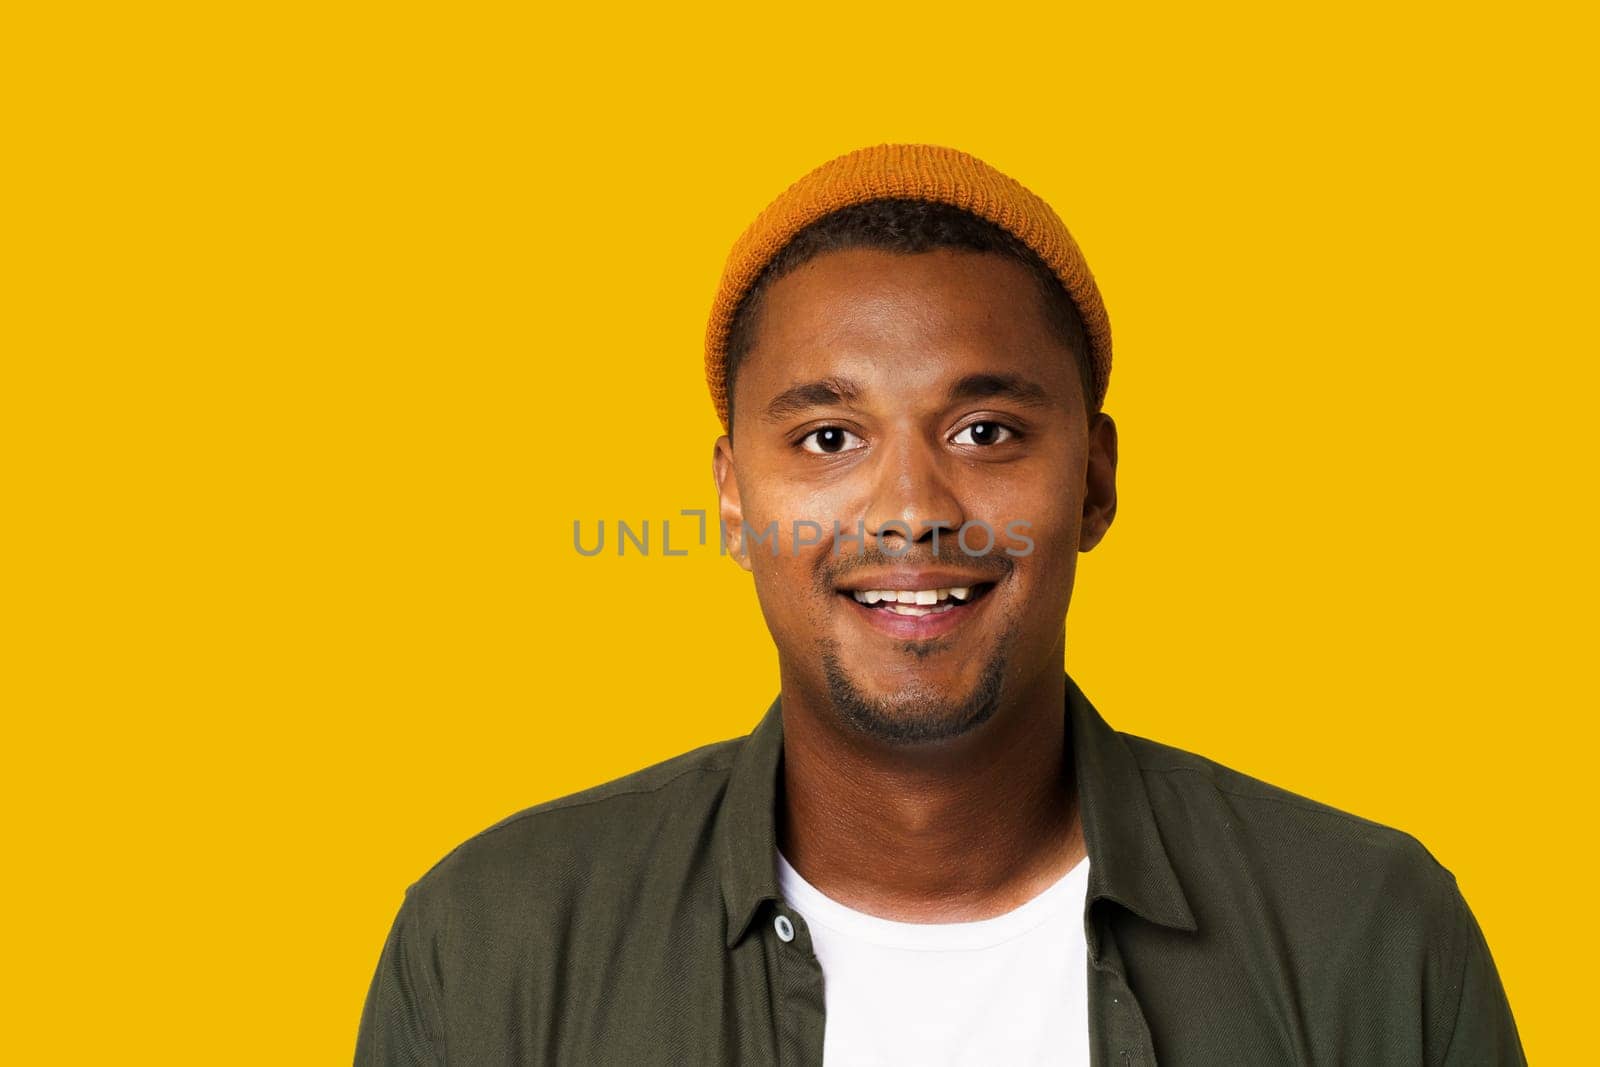 African Man Student In Basic Green Shirt Portrait Isolated On Trendy Orange-Yellow Background. High quality photo